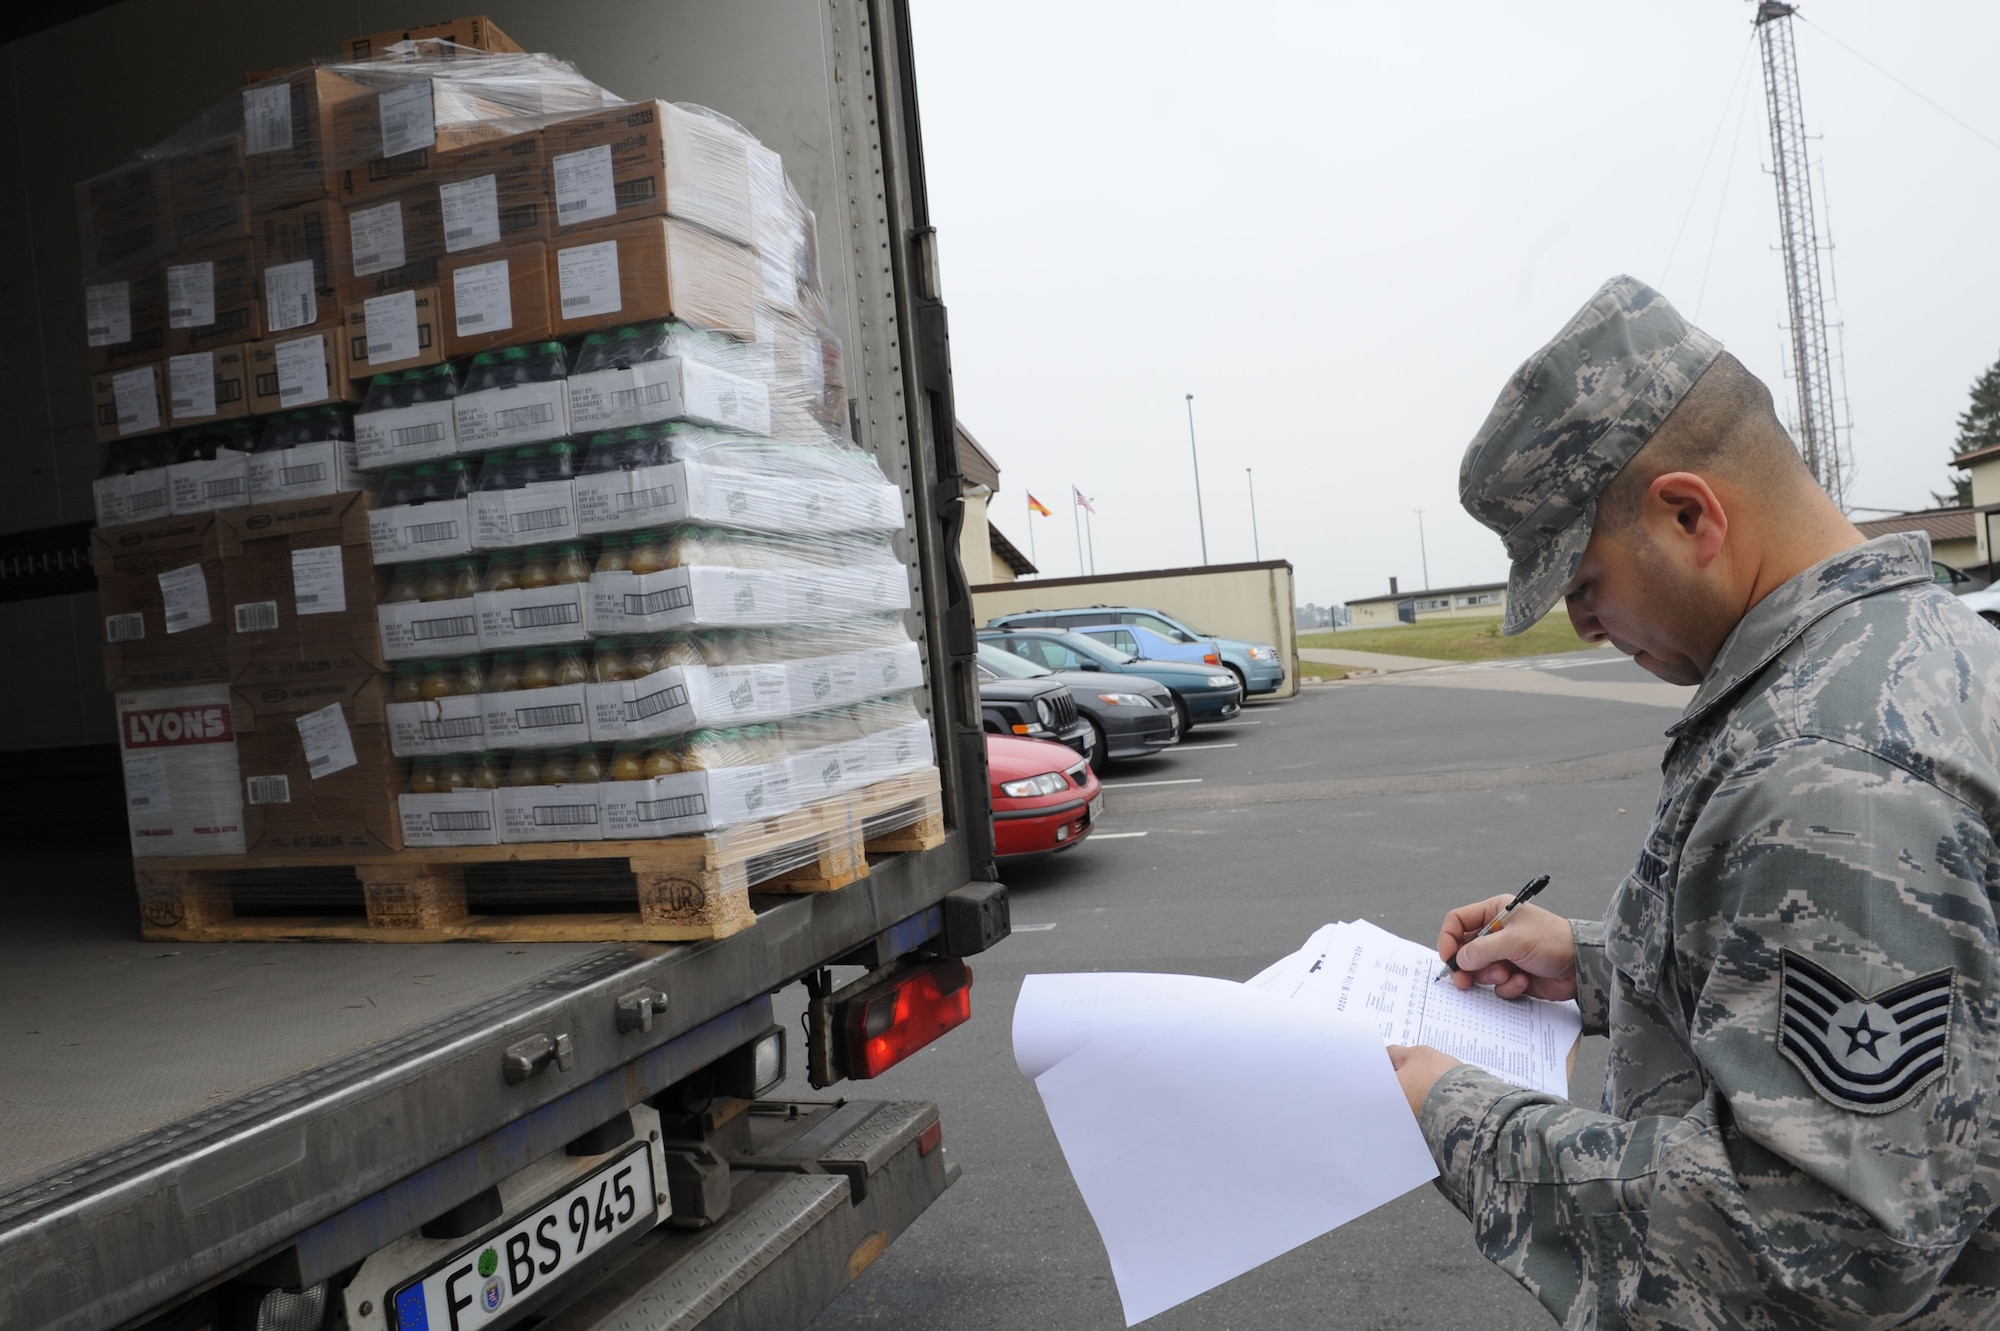 SPANGDAHLEM AIR BASE, Germany – Tech. Sgt. Andrews Adinig, 52nd Force Support Squadron dining facility assistant manager, verifies the quality and quantity of food products during a delivery at the Mosel Hall Dining Facility here March 13. The DFAC provides fresh meals to more than 4,270 enlisted service members on a daily basis to include breakfast, lunch, dinner and midnight meals. In addition, they provide service to all Department of Defense civilians, military service members and reserve officer training corps cadets with temporary duty orders. The DFAC also provides service to all family members and retirees on a case by case base, such as Thanksgiving, Christmas and Air Force birthdays. (U.S. Air Force photo by Senior Airman Christopher Toon/Released)